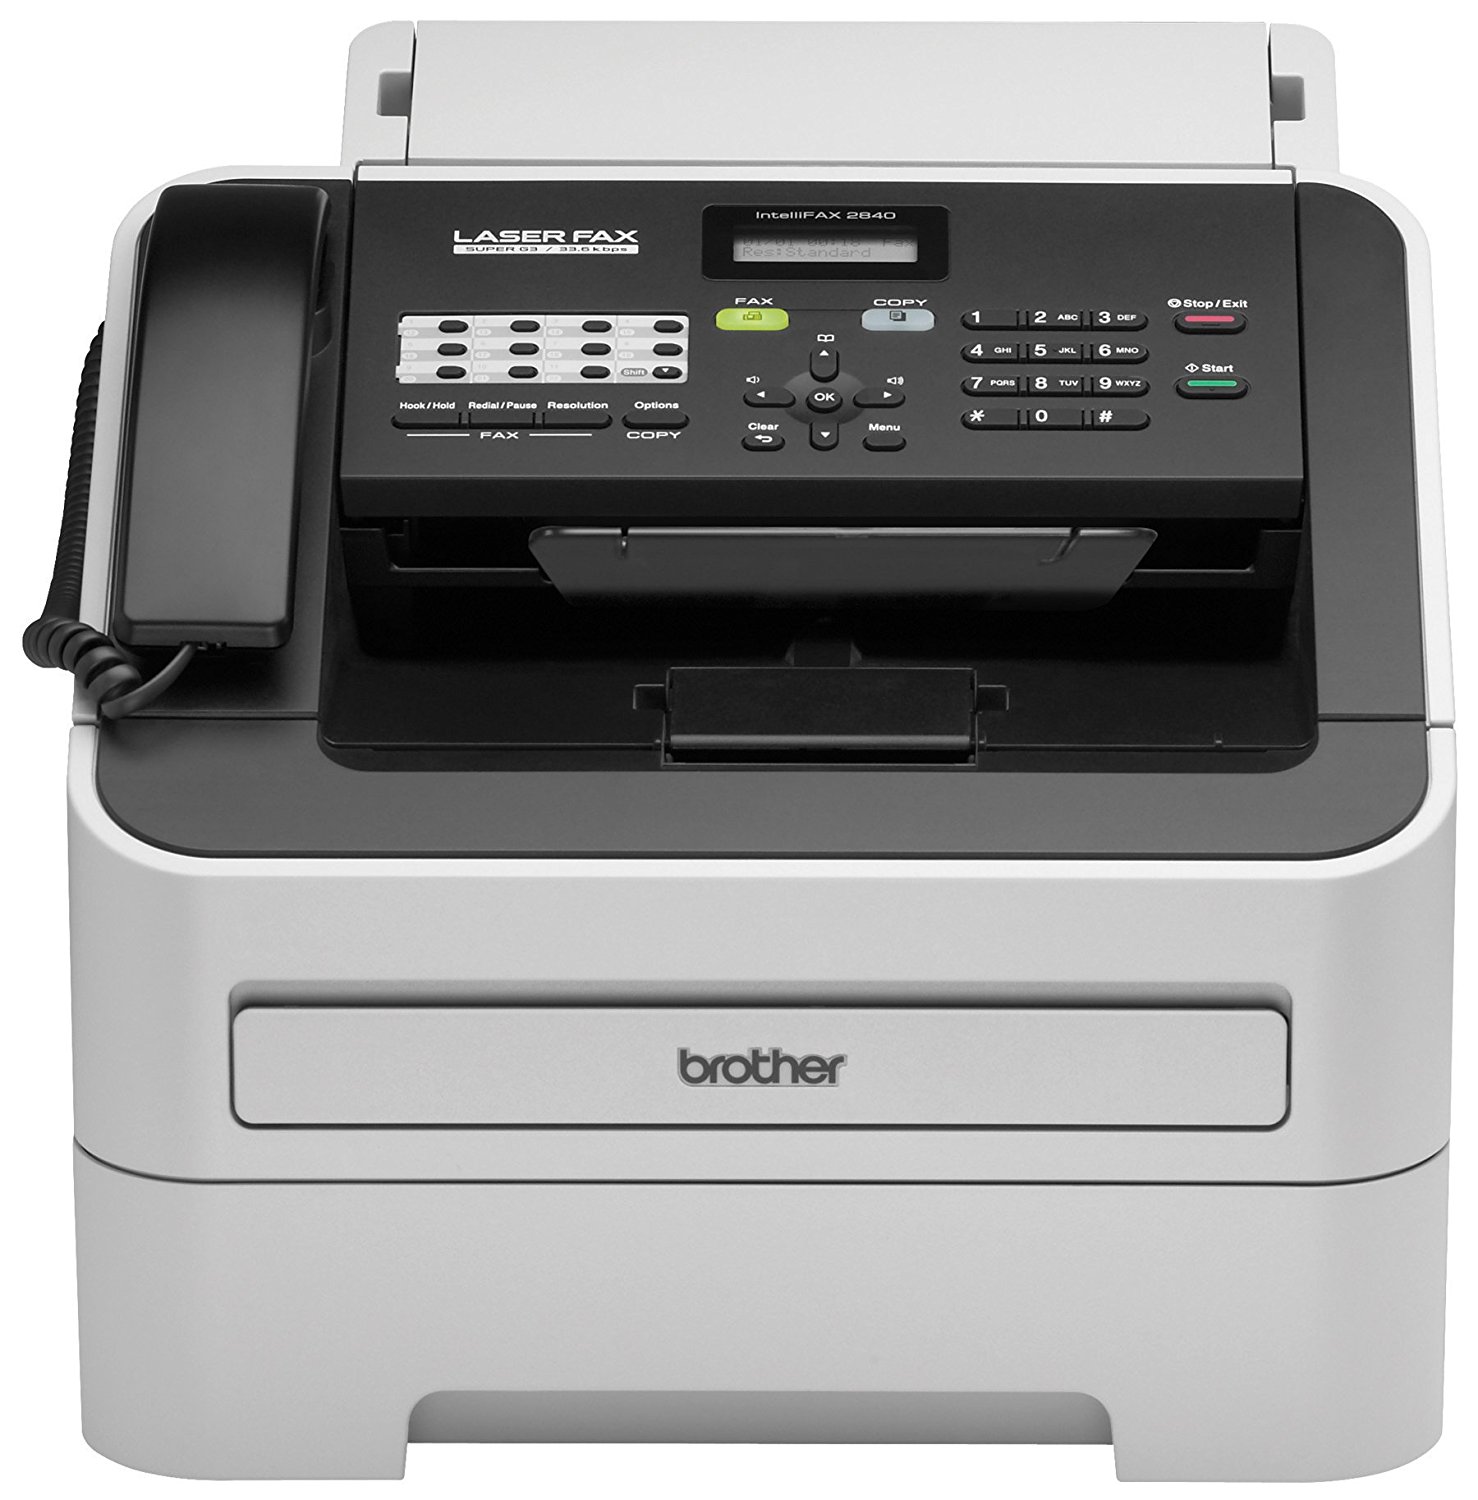 Brother Printer RFAX2840 Wireless Monochrome Printer with Scanner & Fax (Certified Refurbished)